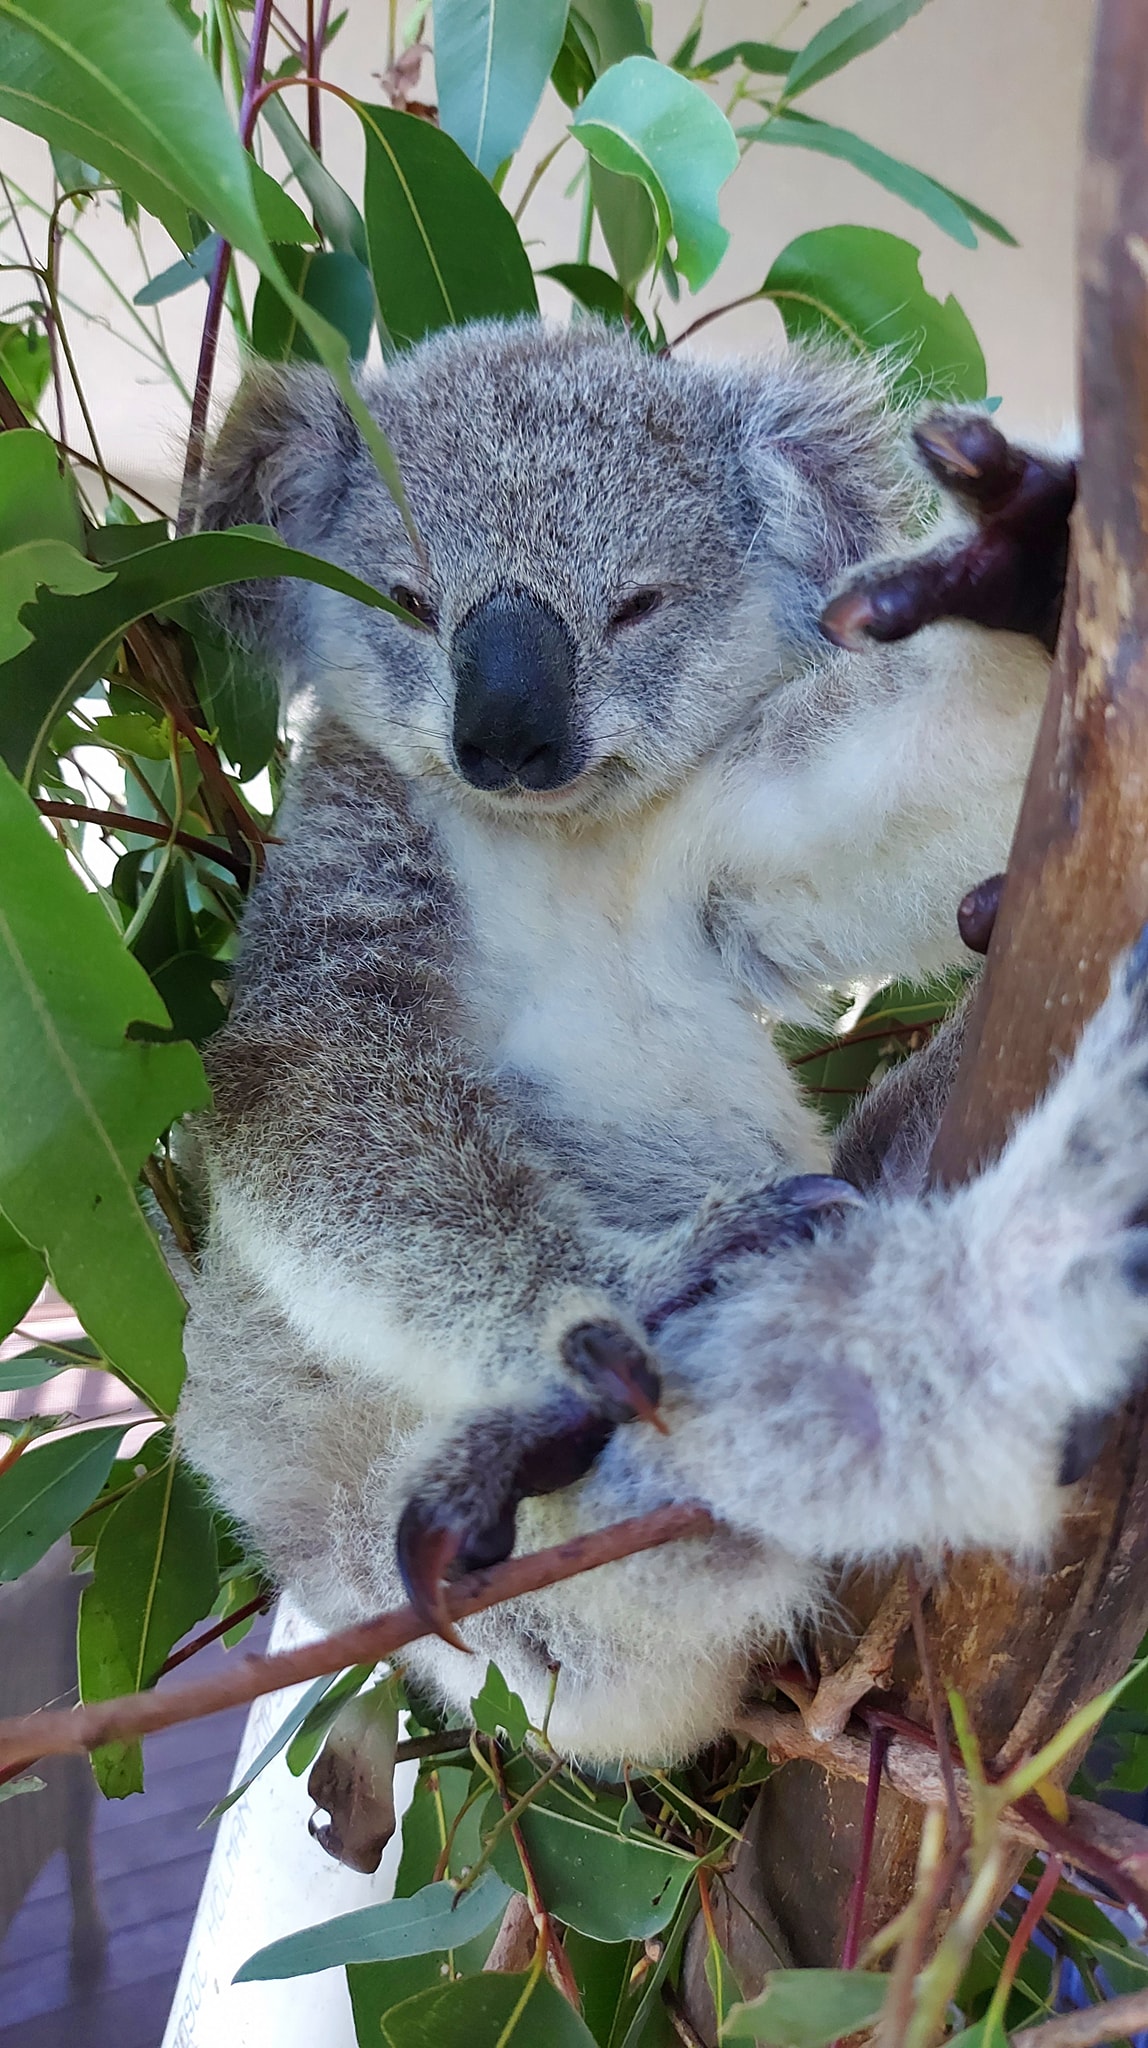 rescued koala named Dimples thriving in wild with joey of her own